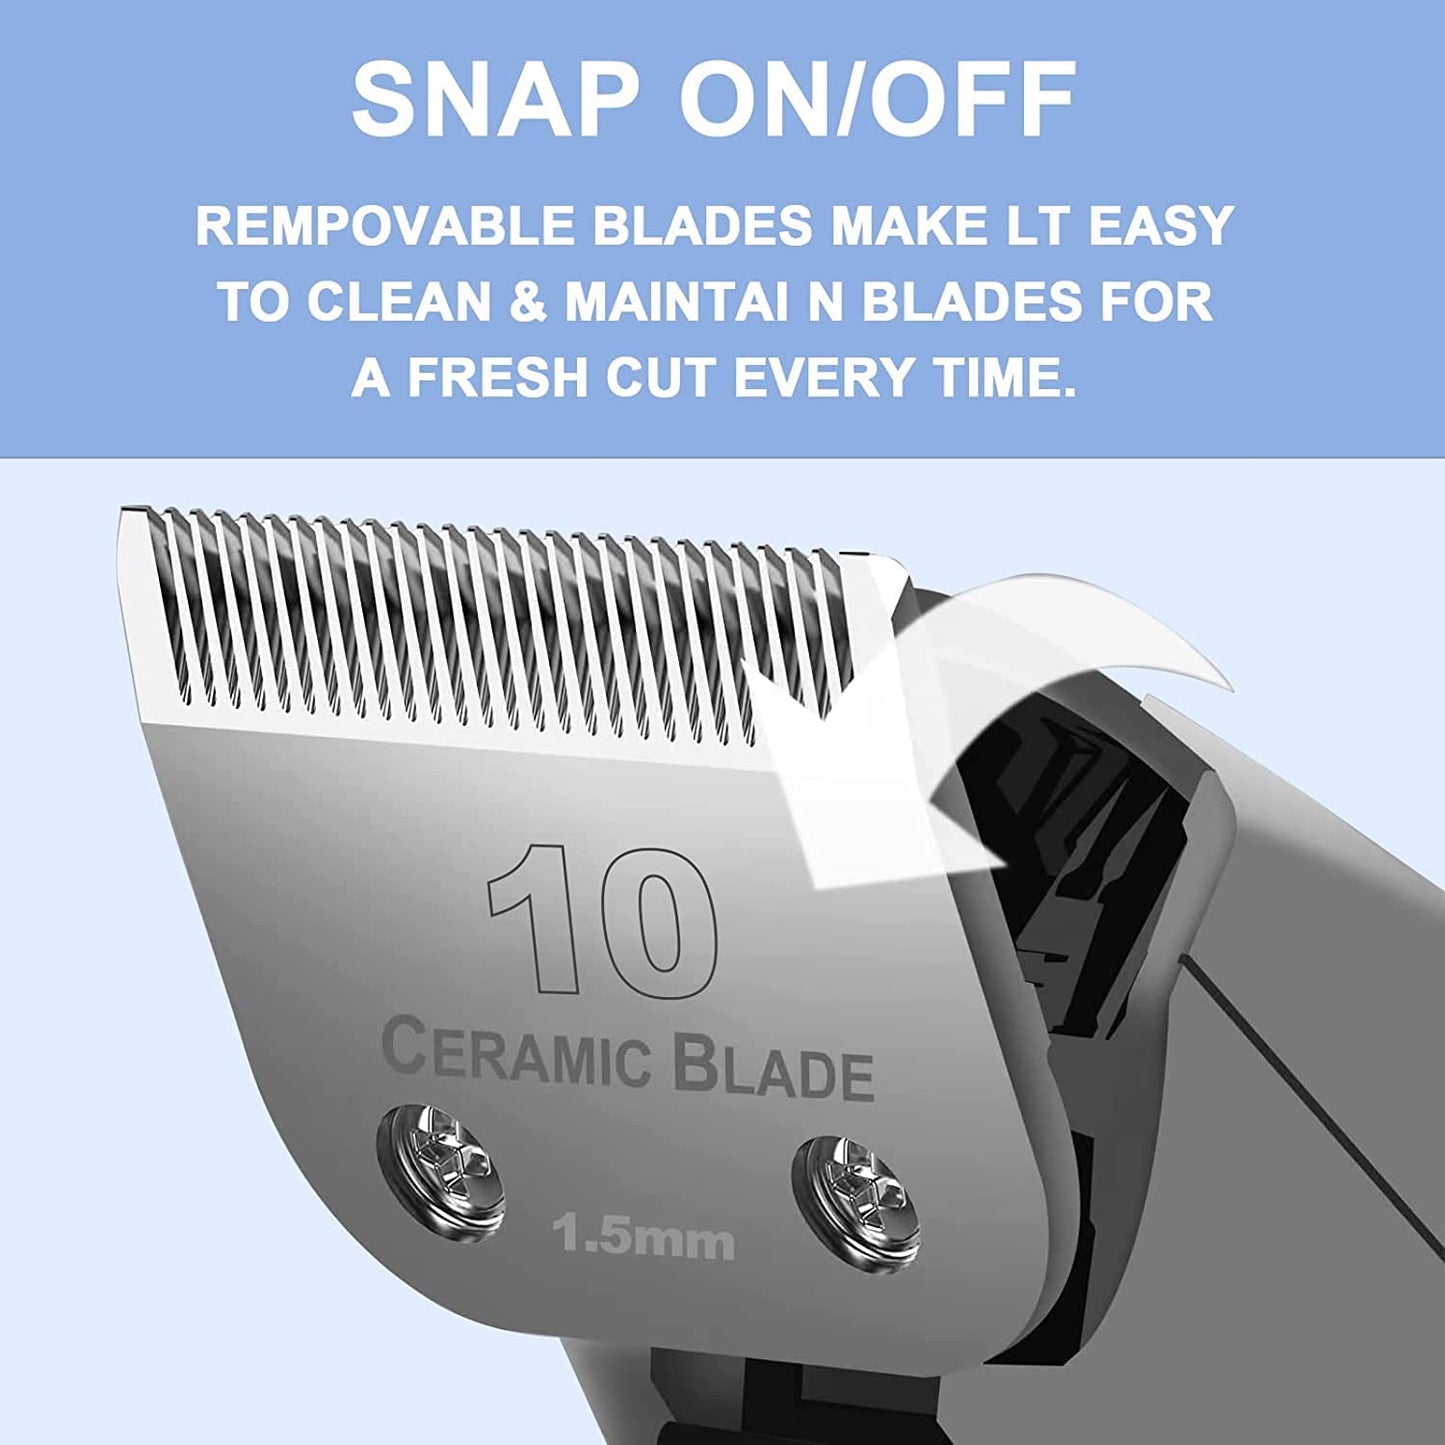 Dog Grooming Clipper Replacement Blades Compatible with Andis/Wahl / Oster Dog Clippers,Detachable Ceramic Blade & Stainless Steel Blades(4FC+3FC+5FC+7FC+10)